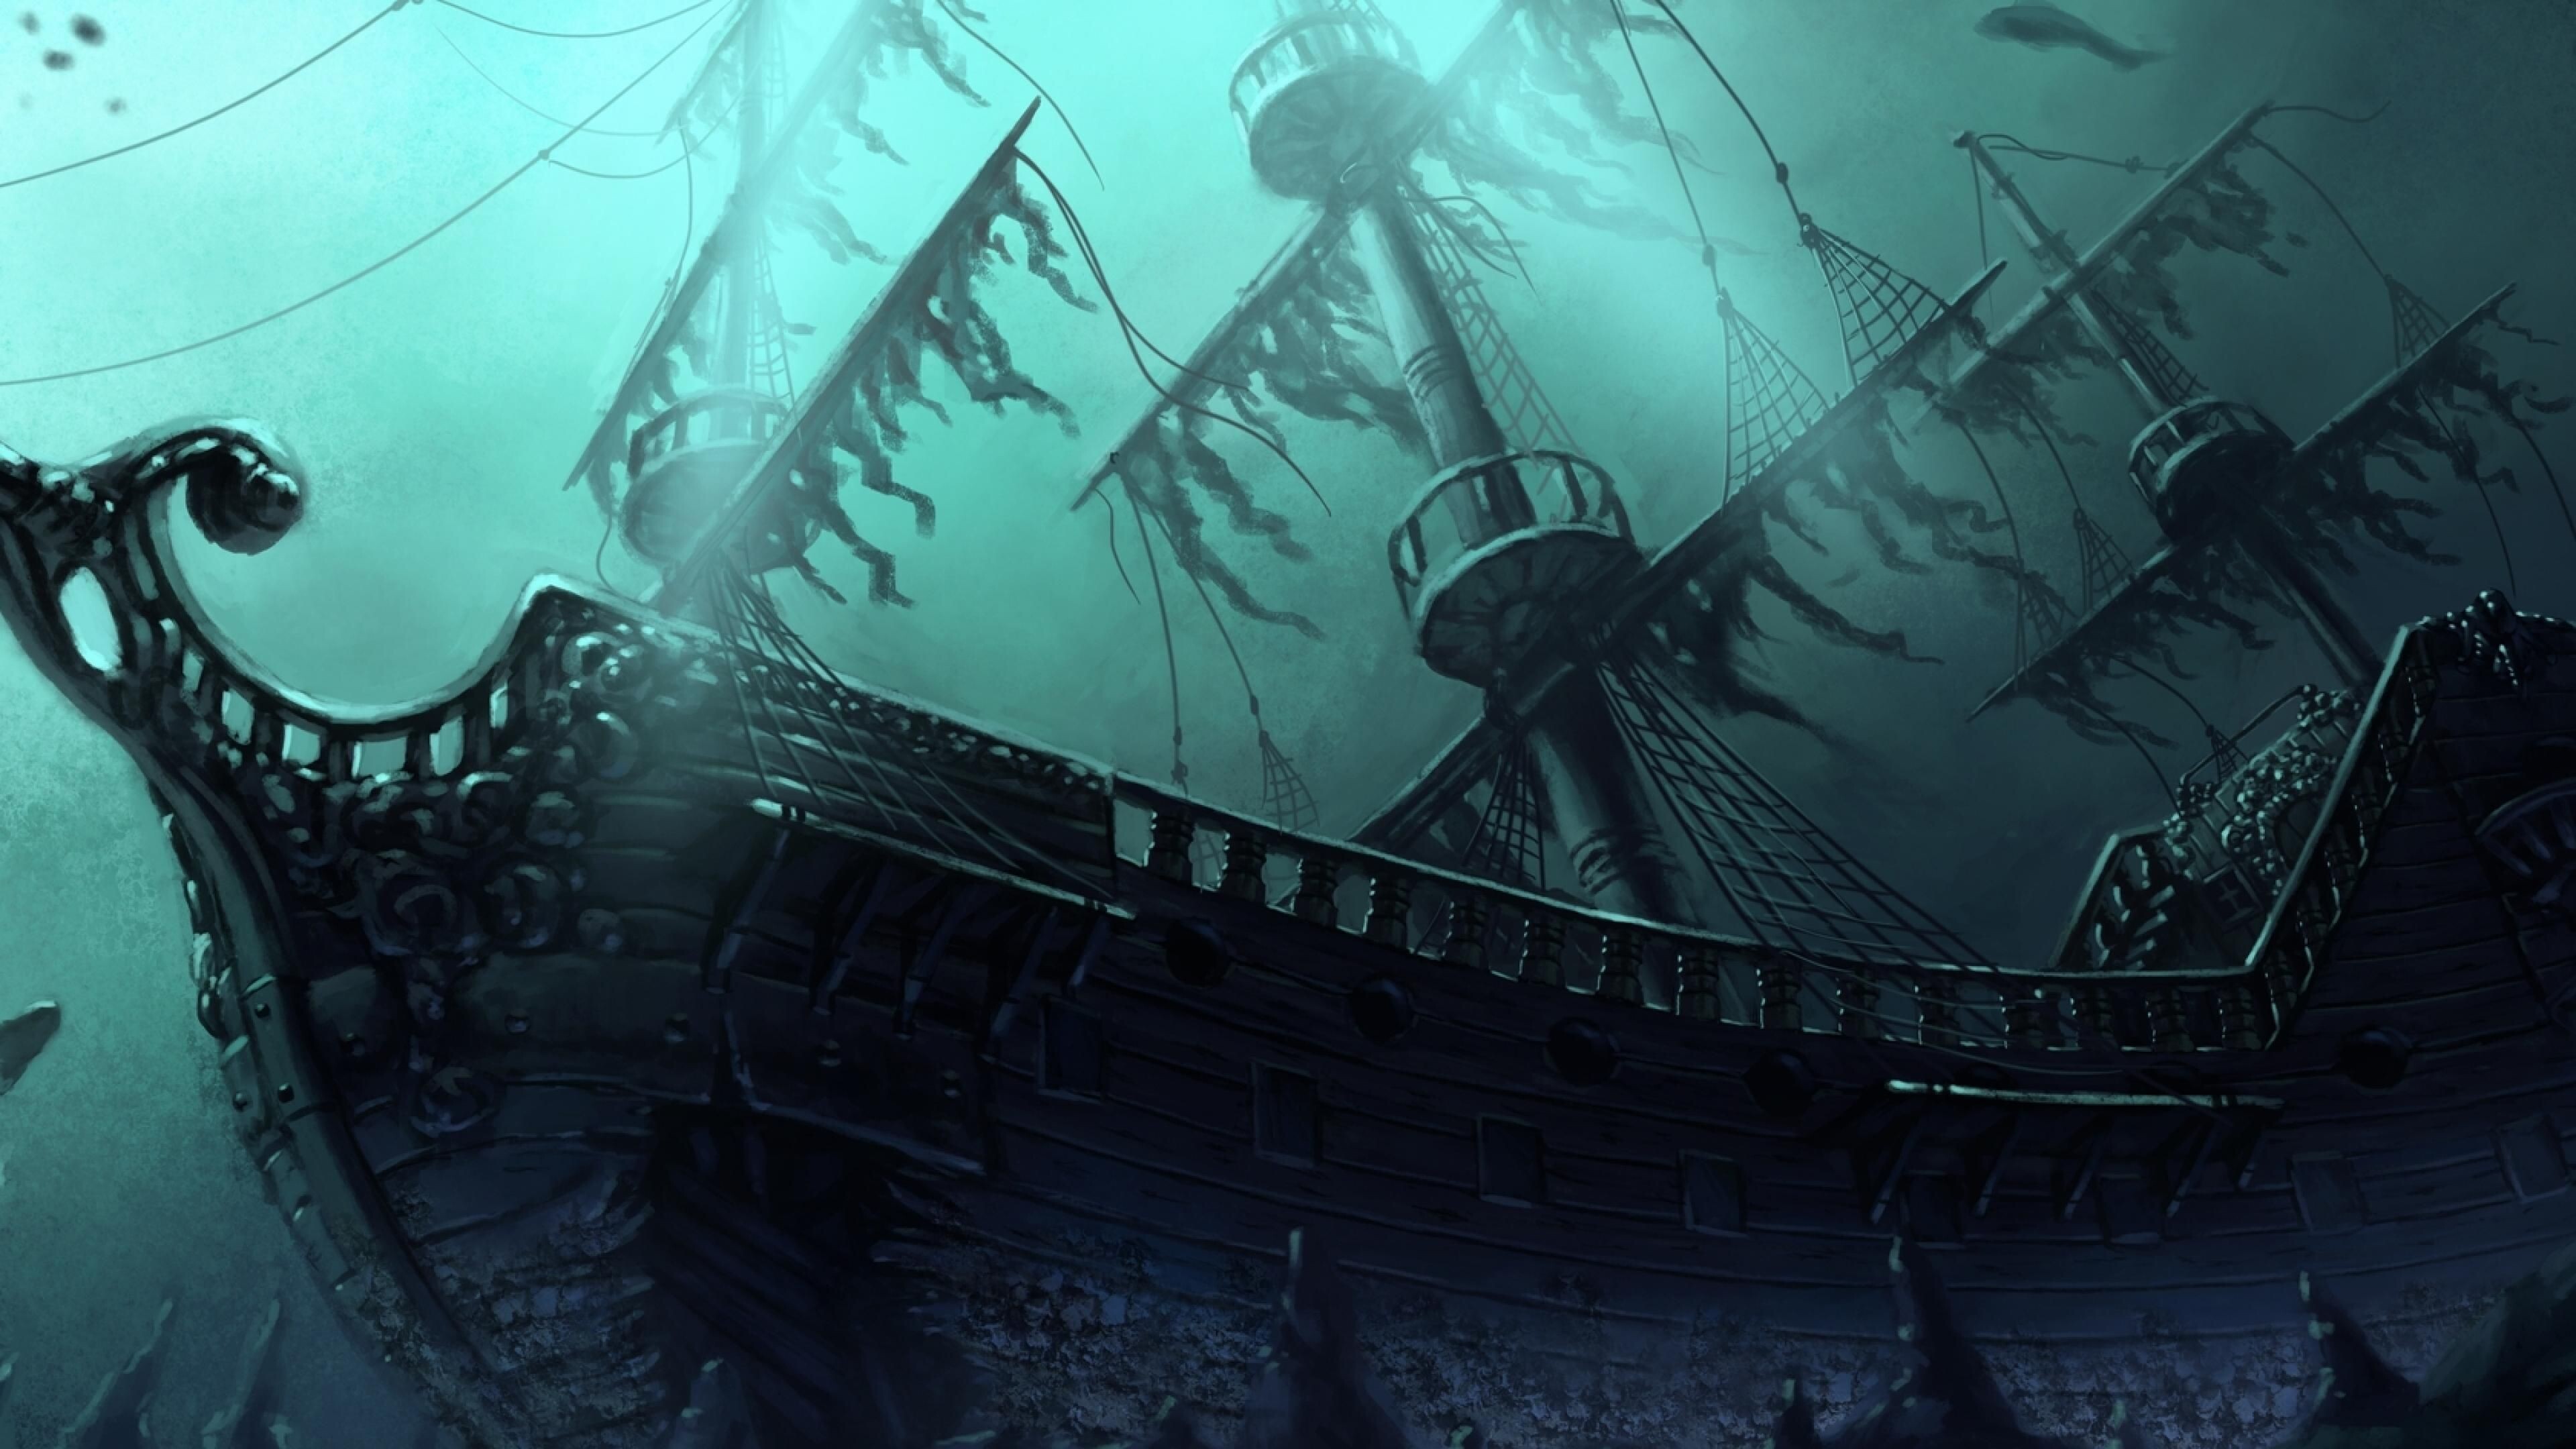 Ghost Ship: A phantom vessel with no living crew aboard, A fictional ghostly vessel, The Flying Dutchman. 3840x2160 4K Wallpaper.